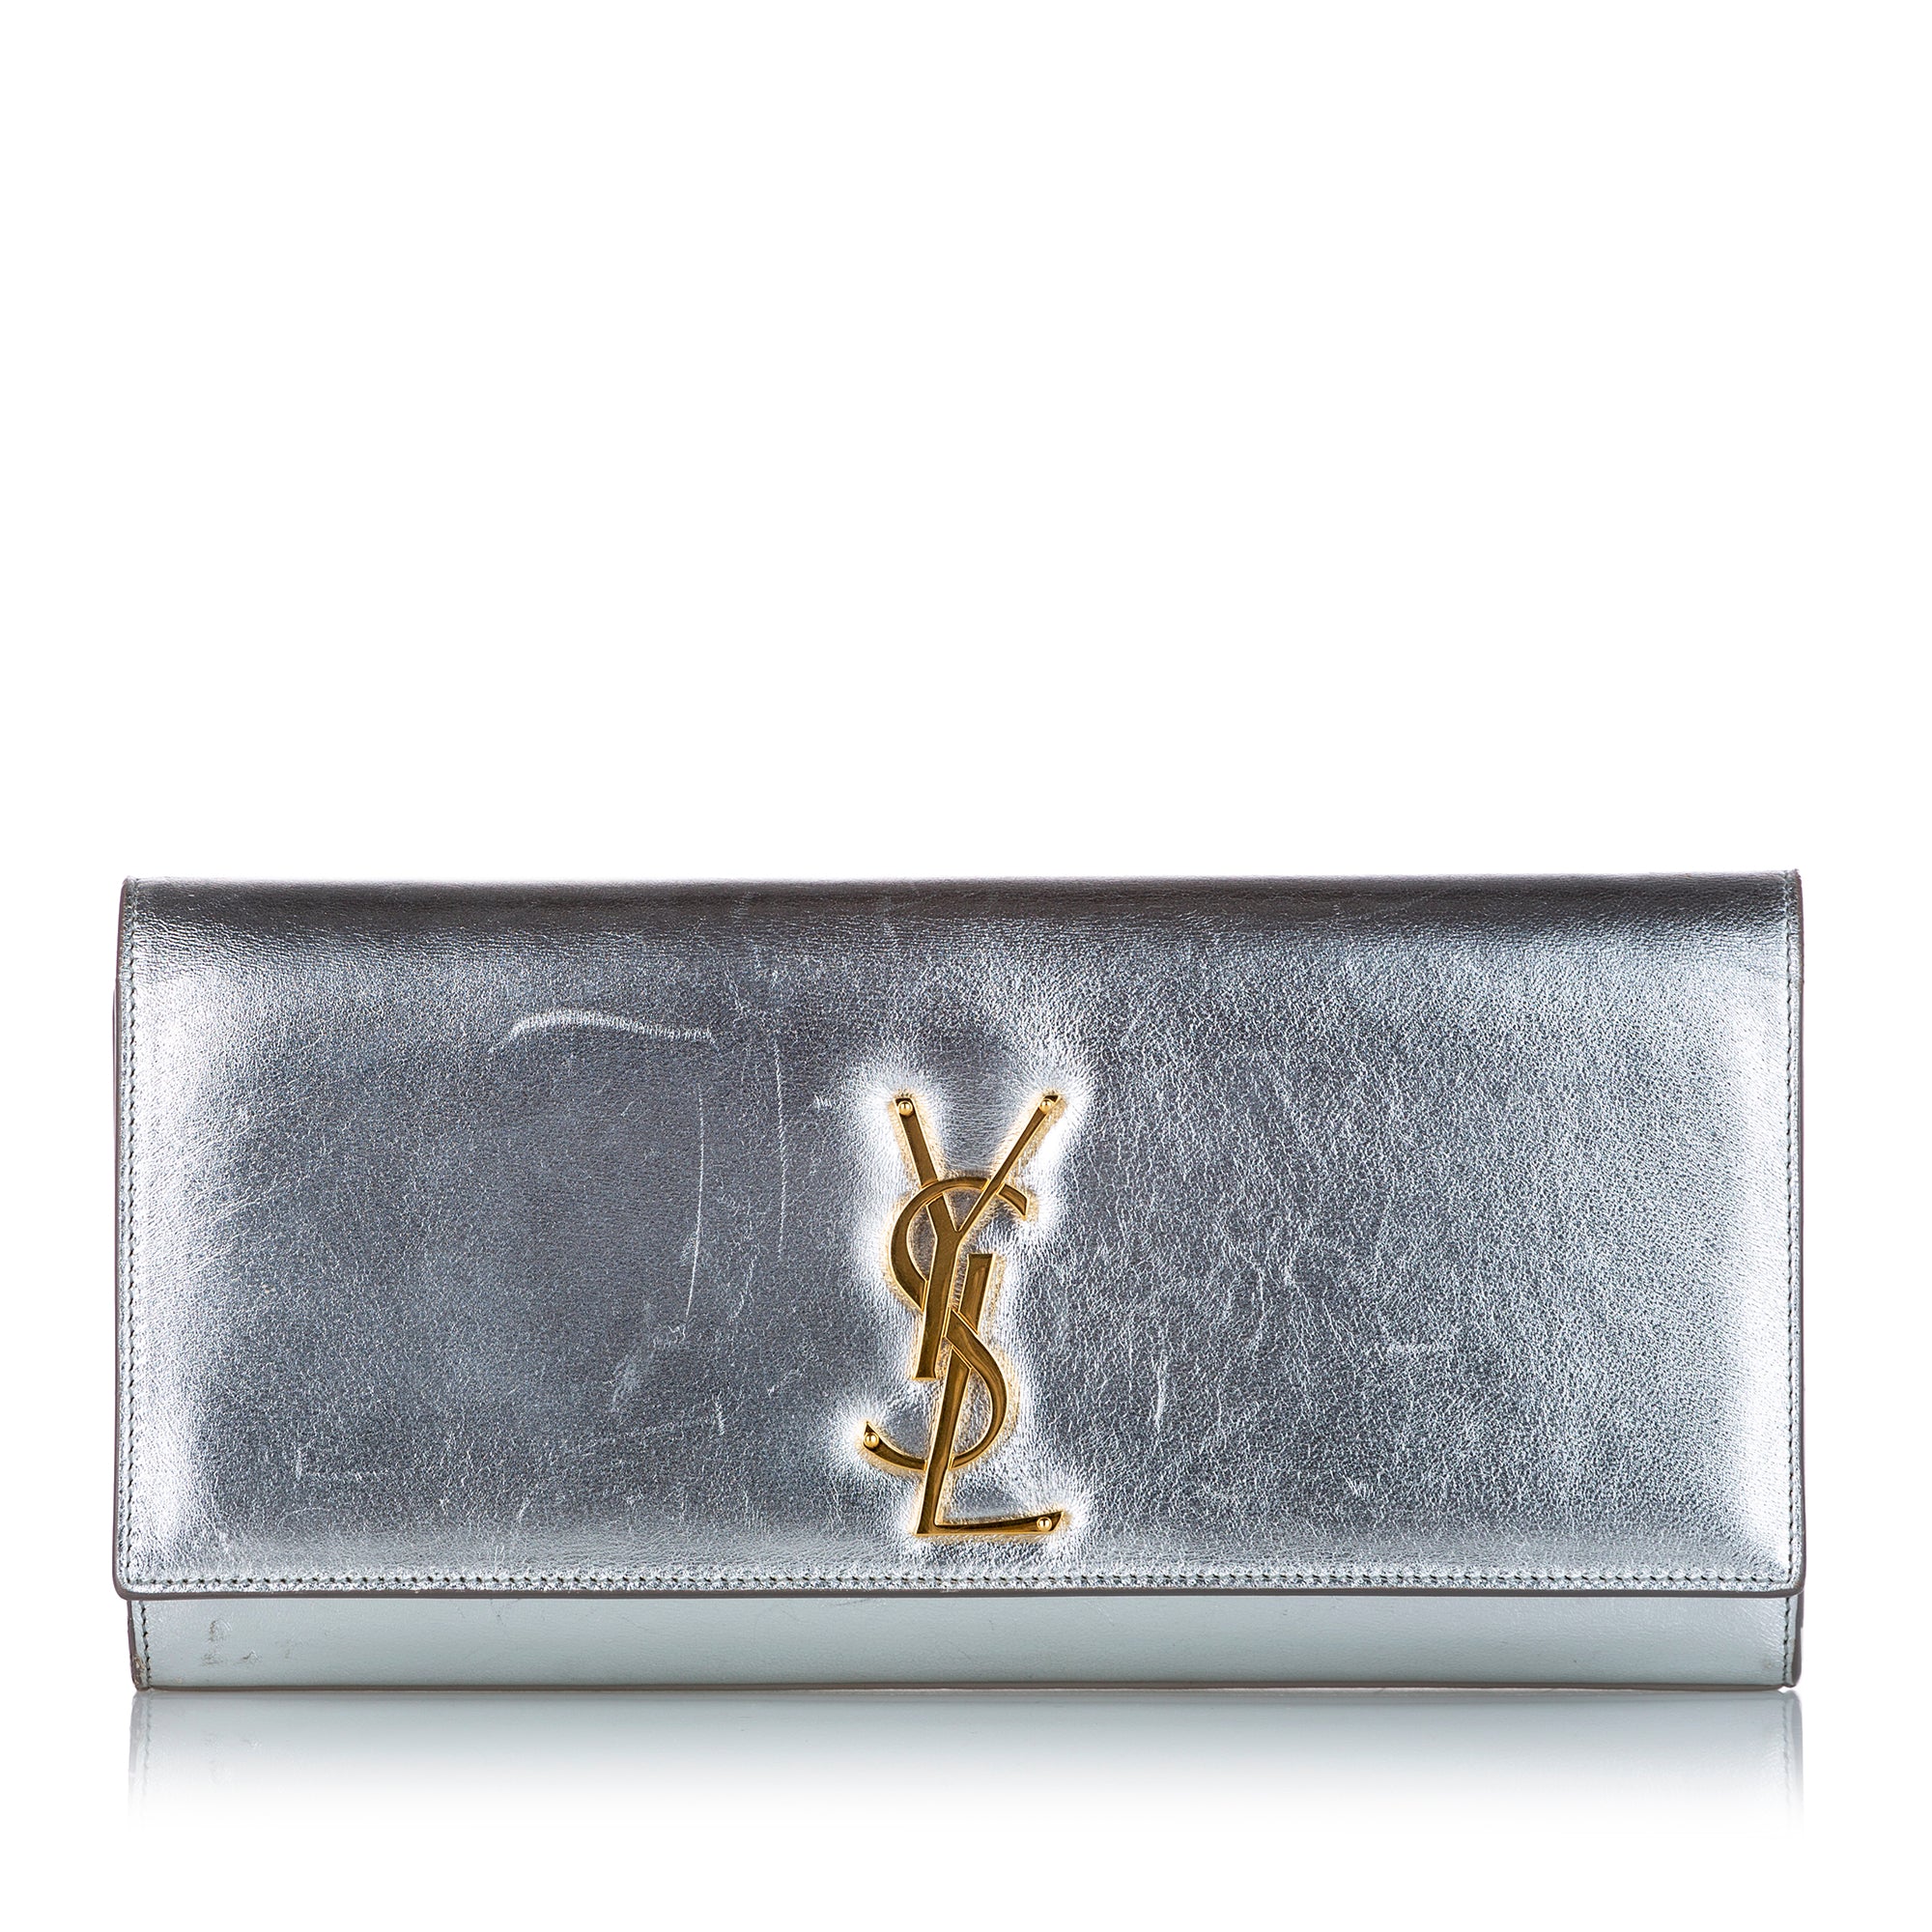 Saint Laurent Ysl New Small Kate Mirror Bag In Silver